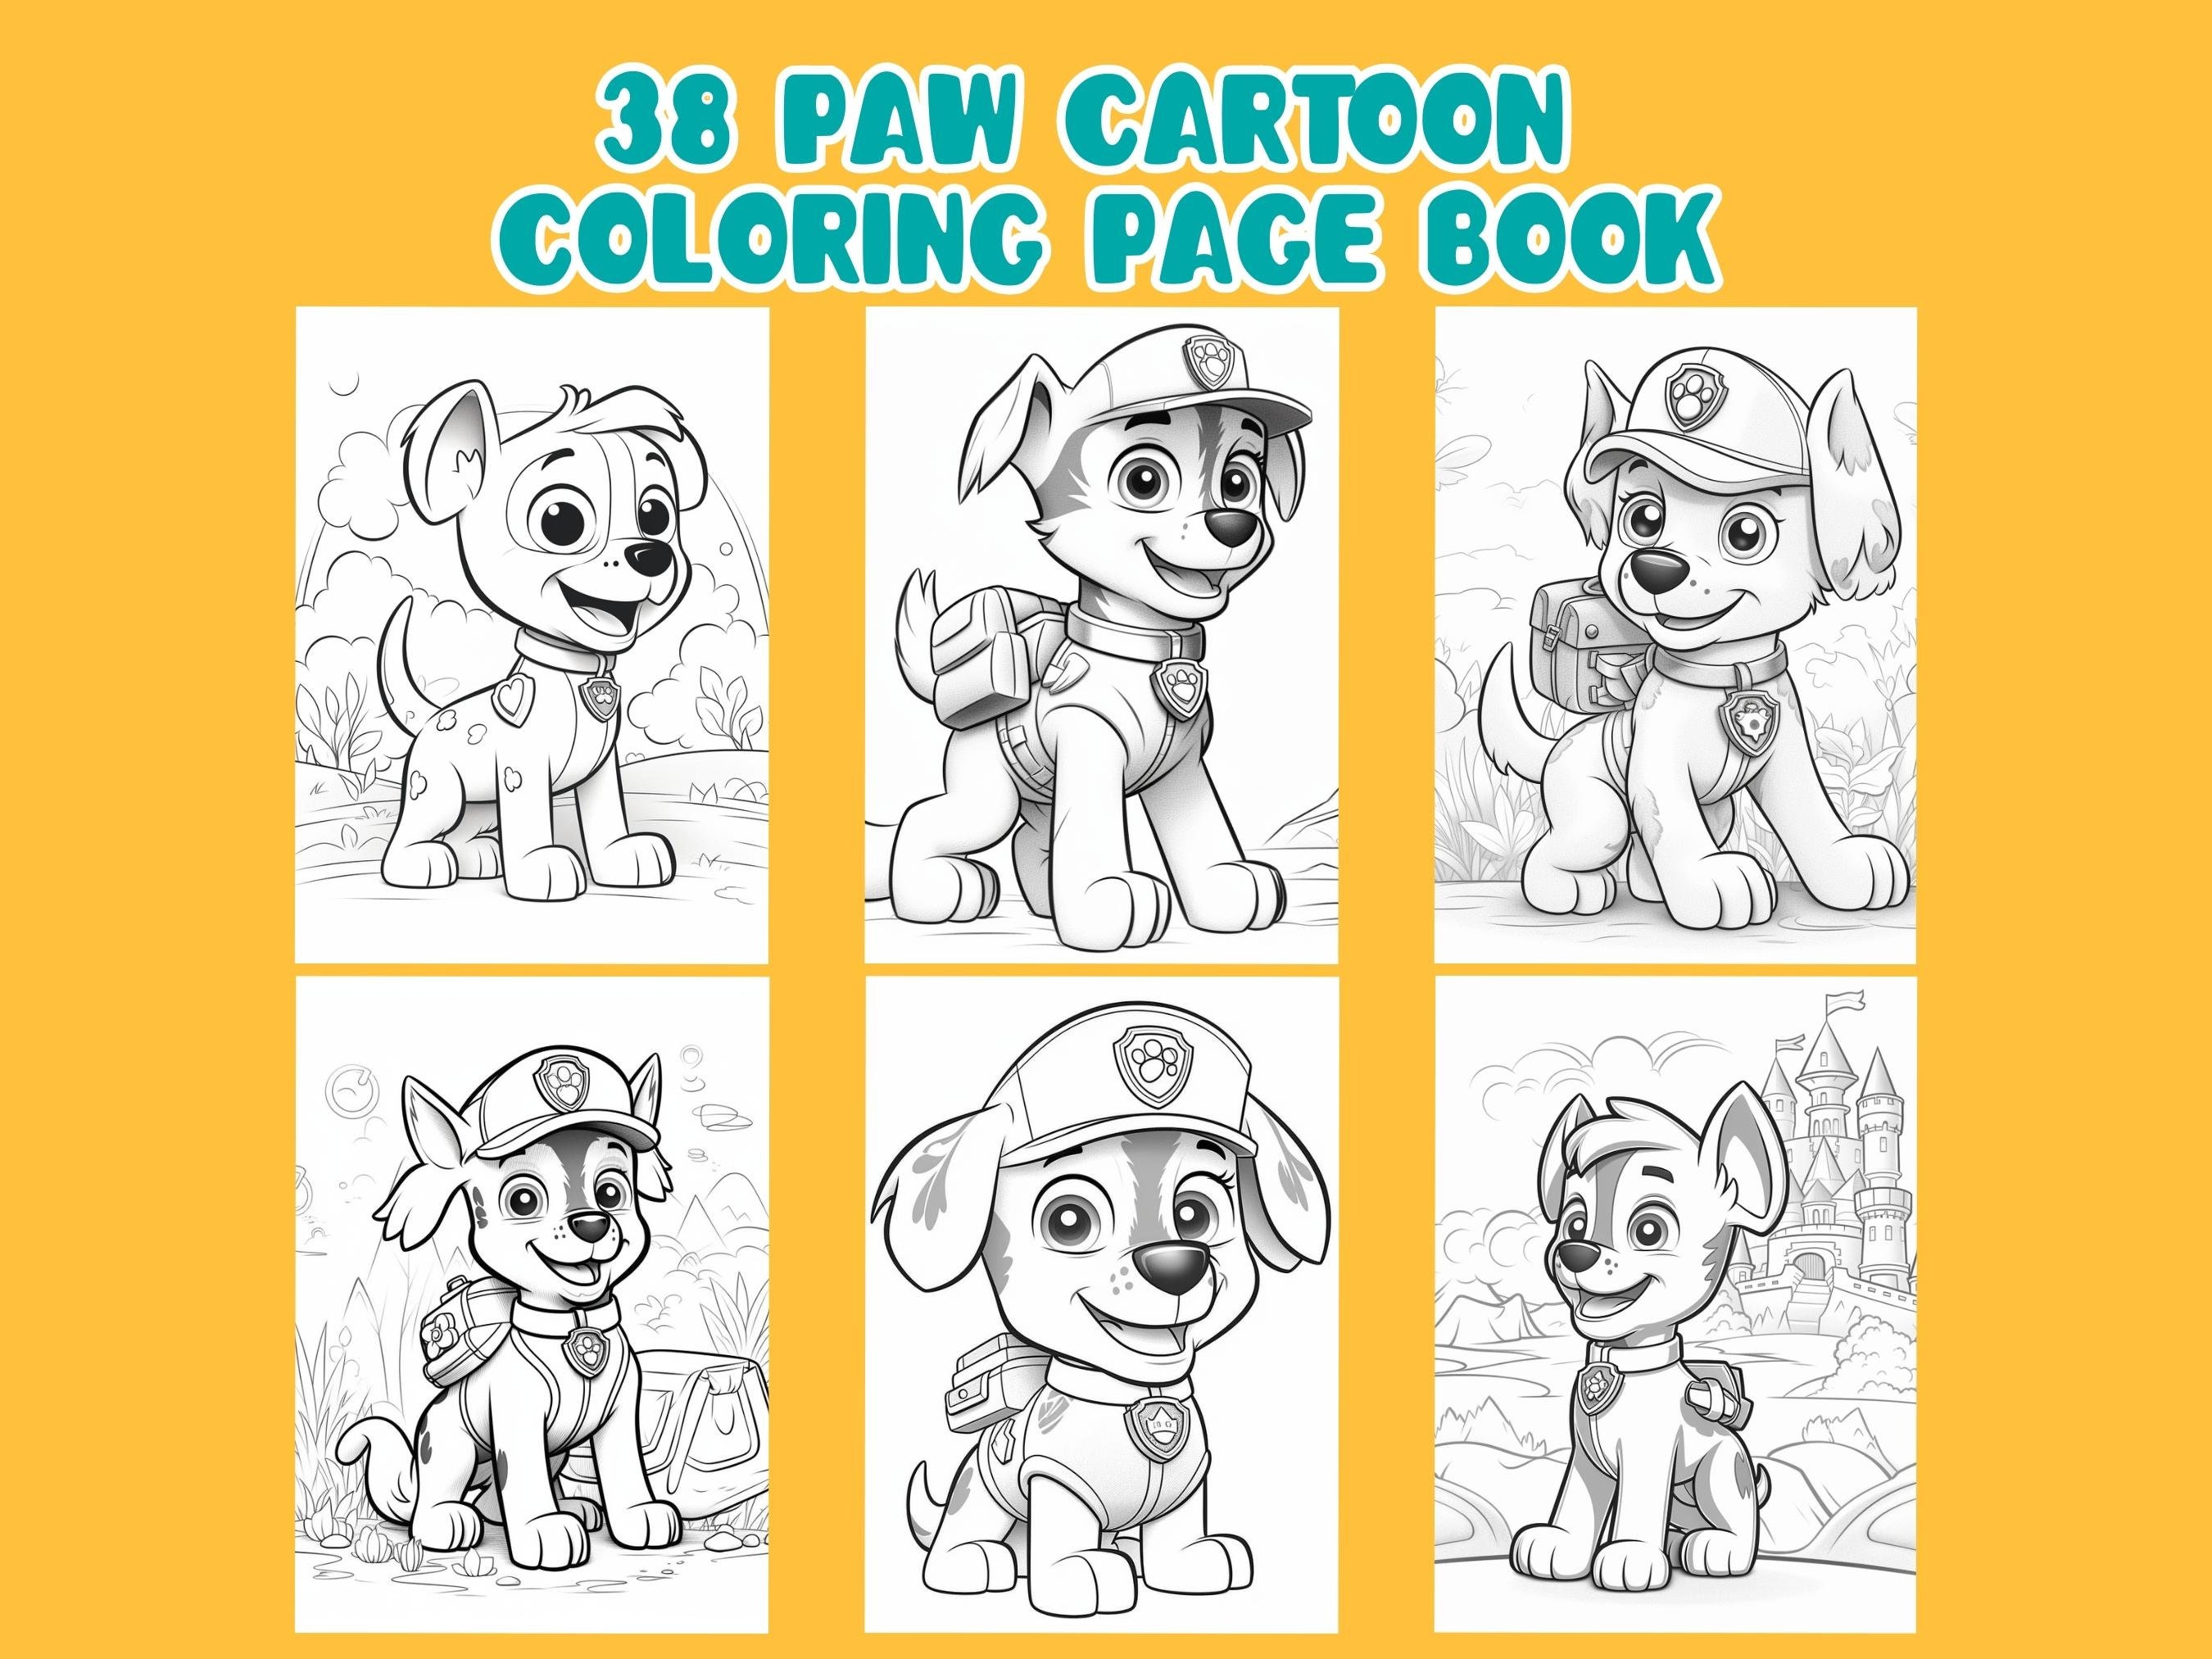 Paw Patrol Spring Into Action Coloring and Activity Book - 96 Pages